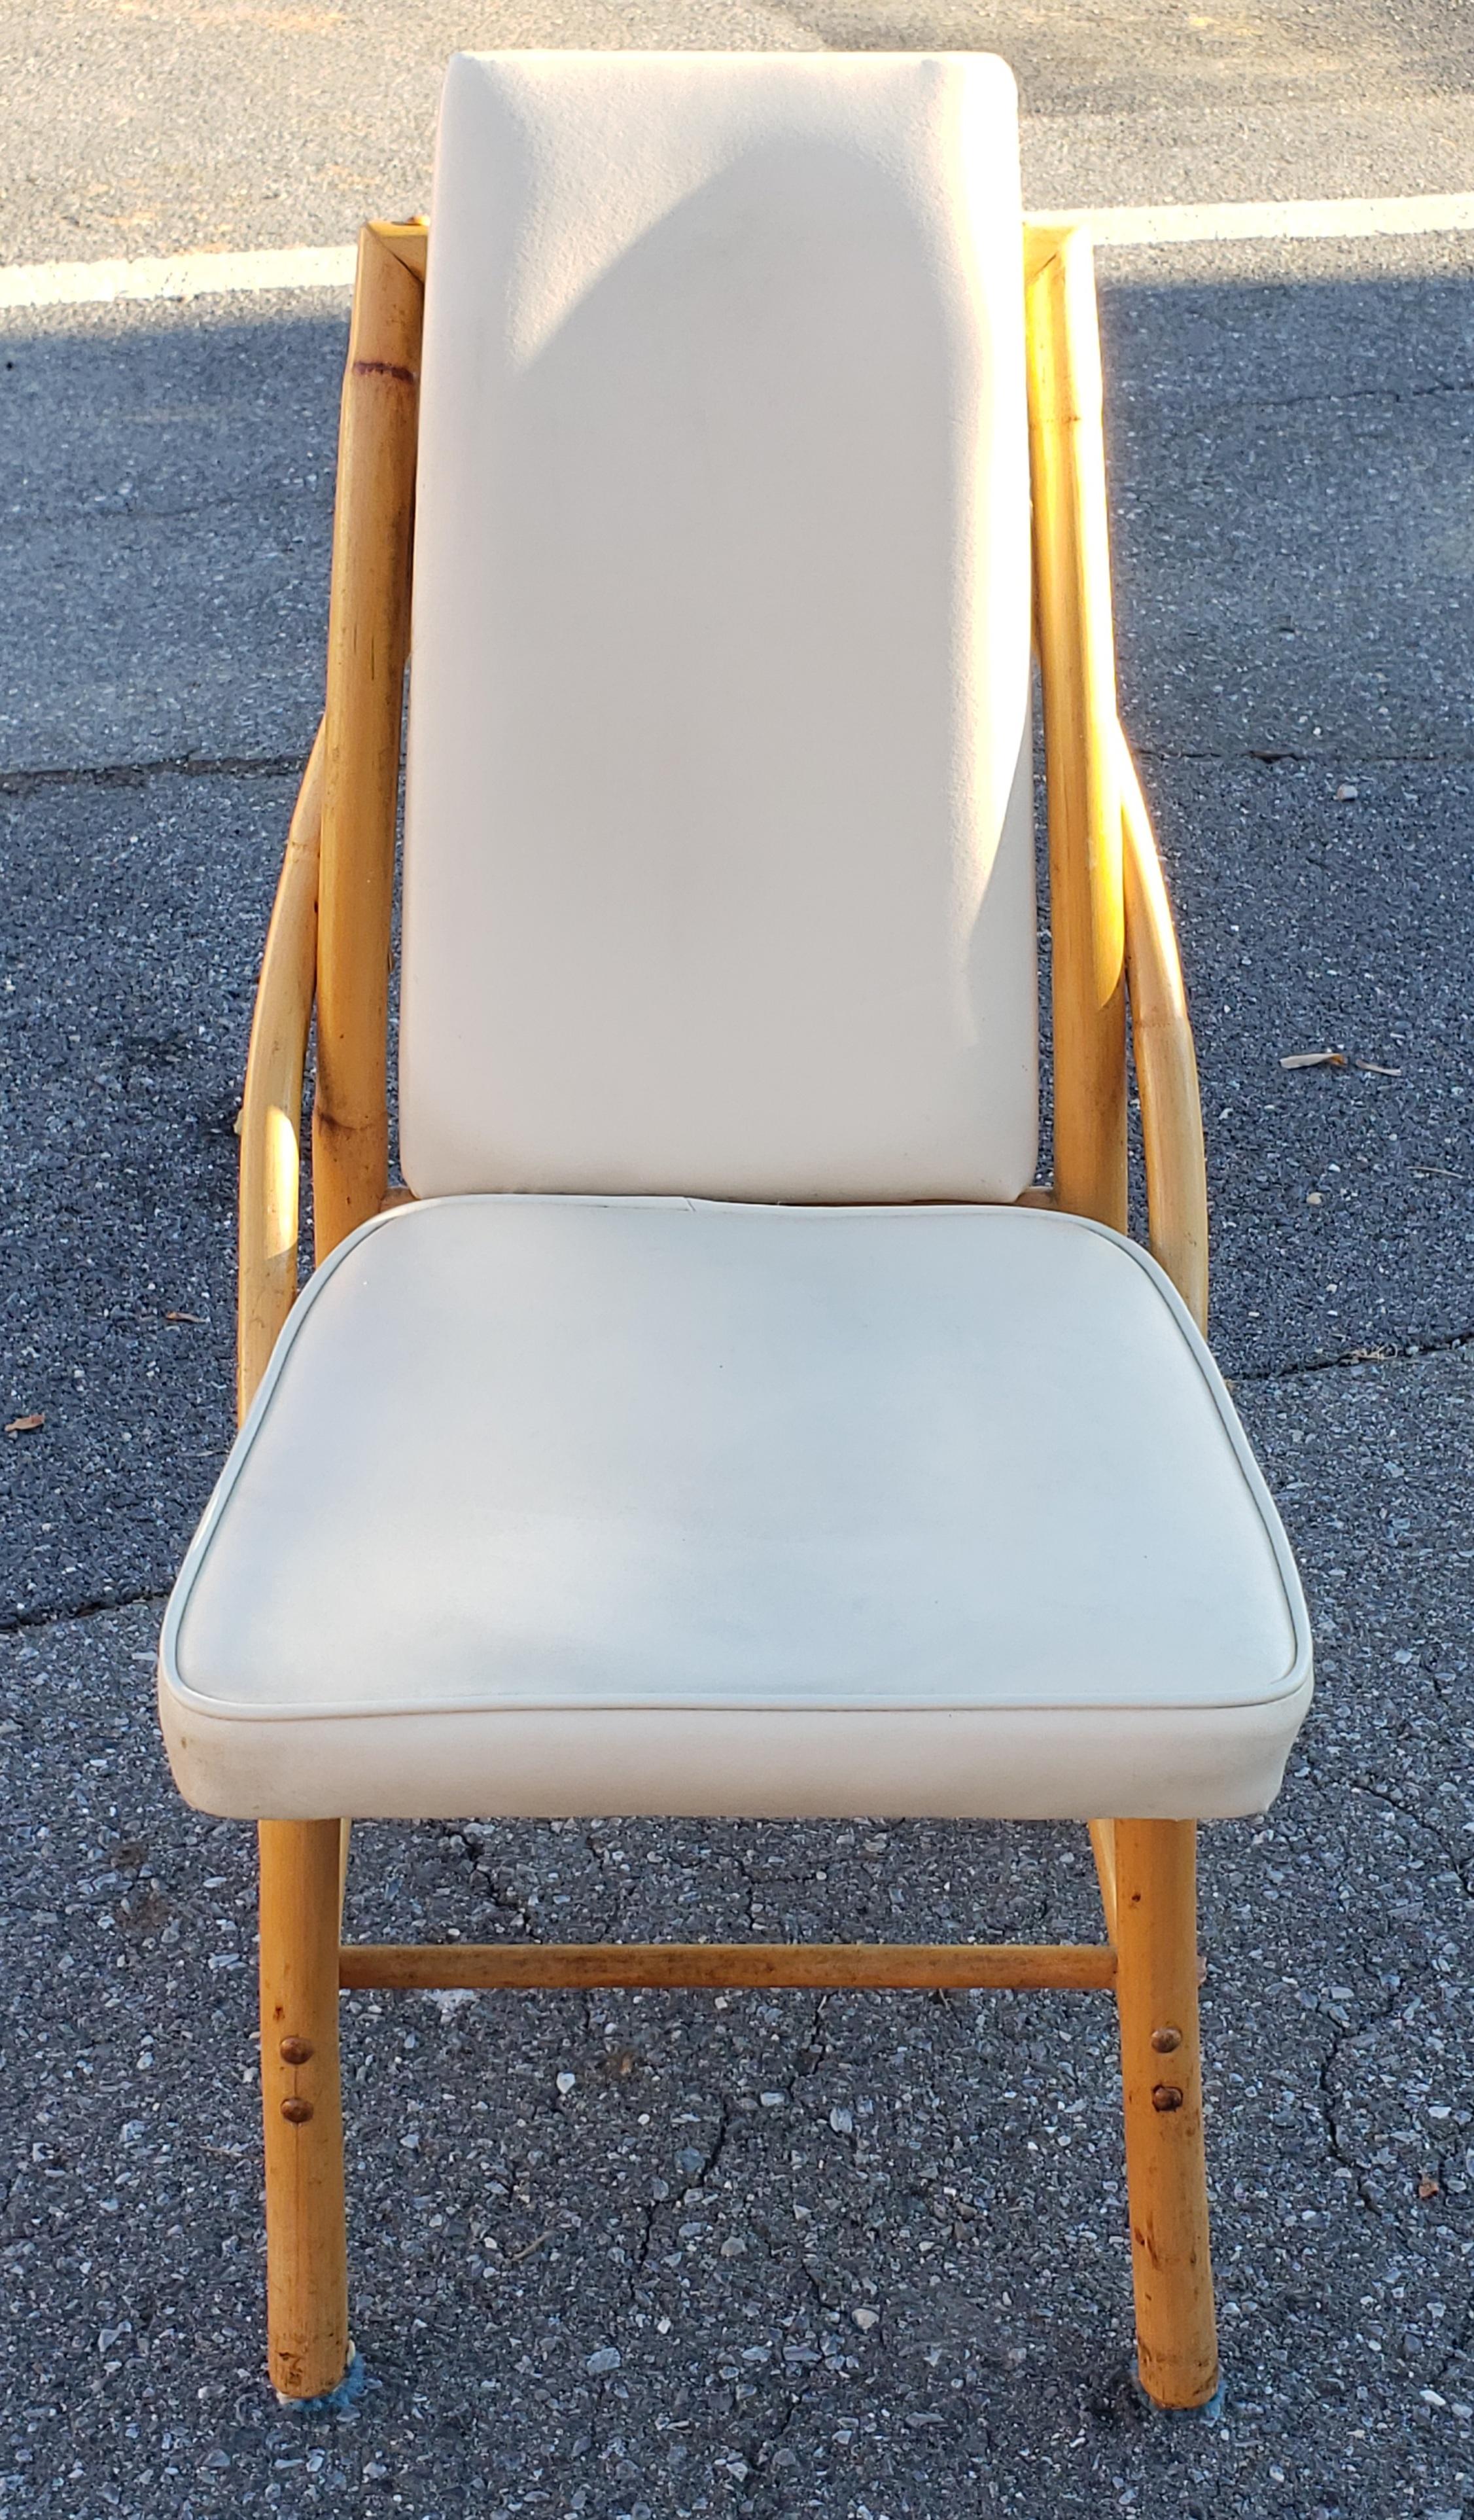 This listing is for a set of 6 very unique dining chairs.  Frame made of curvy rattan. Ivory vinyl seats and backs. Manufactured by Bam-Tan Lantana, Florida USA. Circa 60's.

Size in inches: 36 tall x 21 deep x 18 wide. Seats about 17.50 wide x